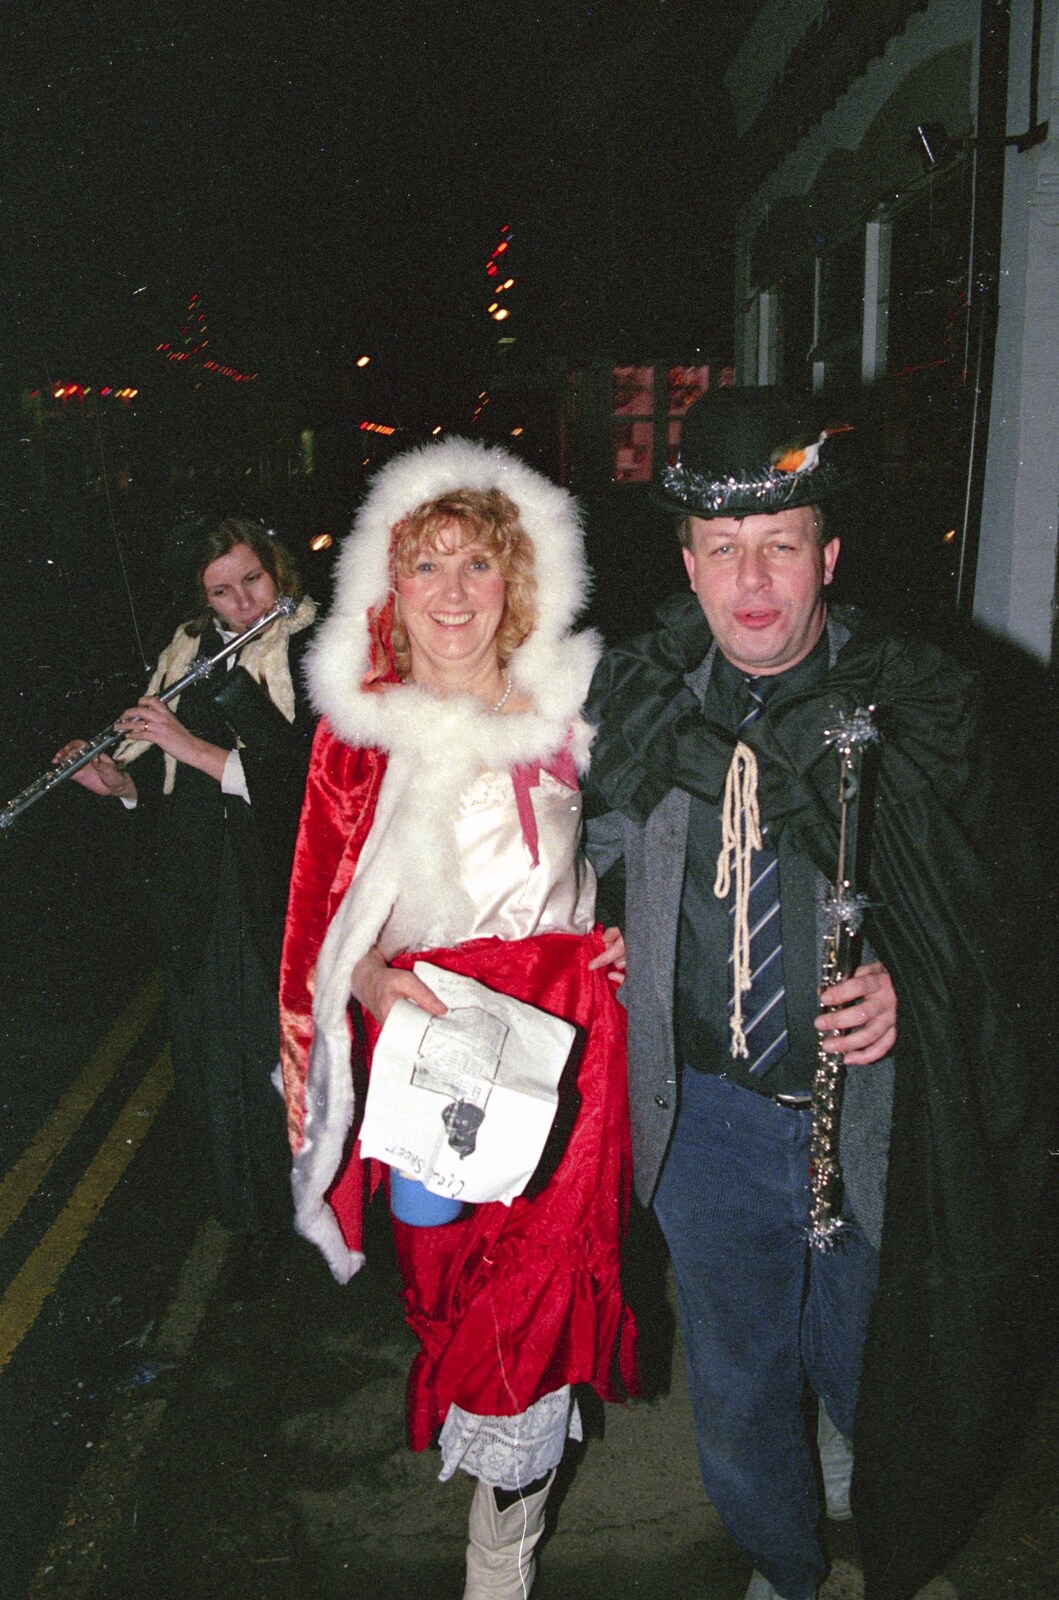 Elteb Griffin, and a bloke with a clarinet from Carol Singing and Late Night Shopping, Stuston, Diss and Harleston, Norfolk - 16th December 1990